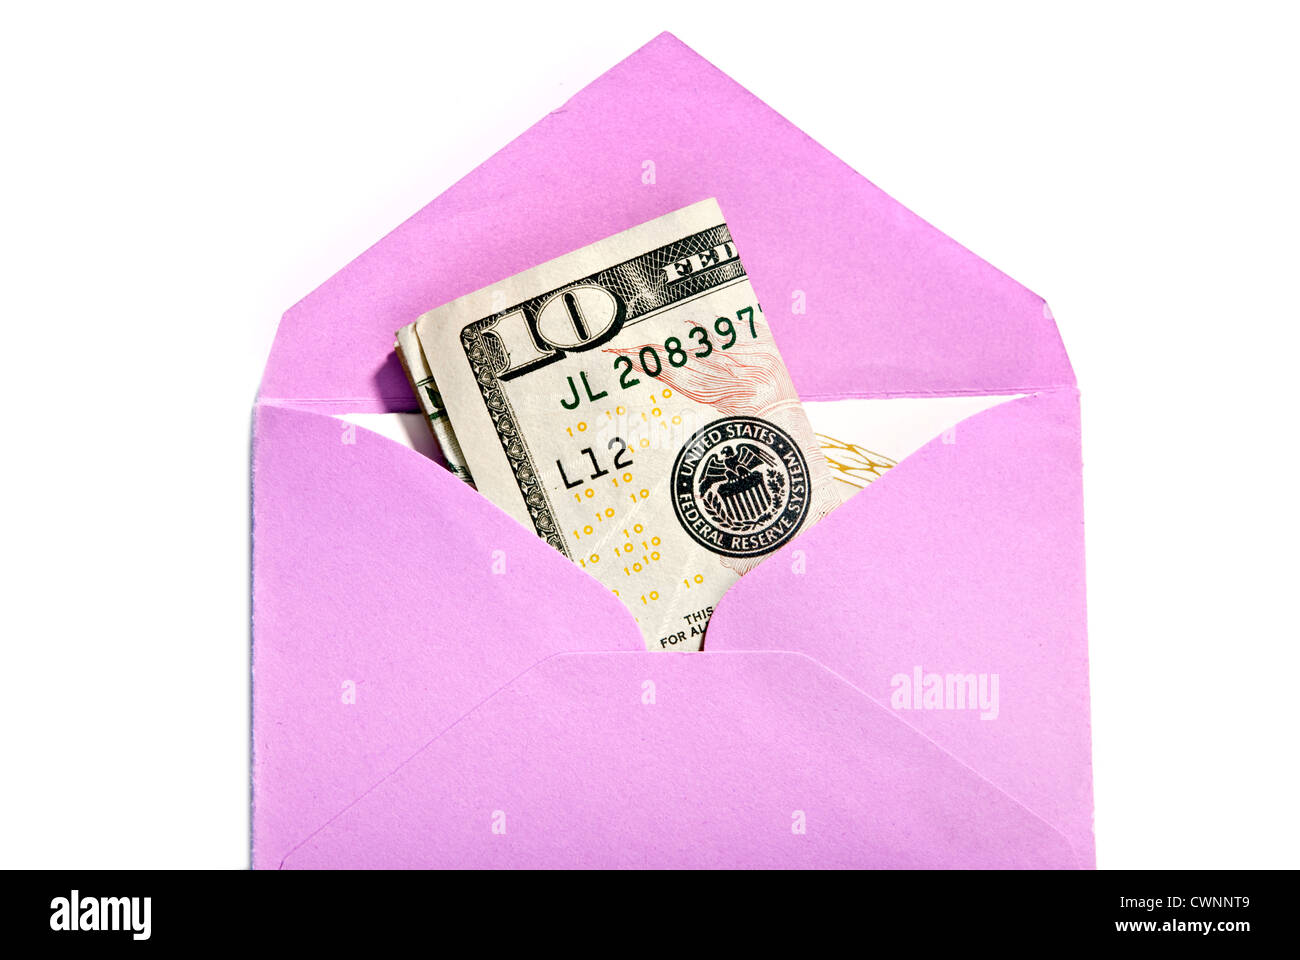 Envelope with a ten-dollar bill, money gift, isolated on 100% white background Stock Photo